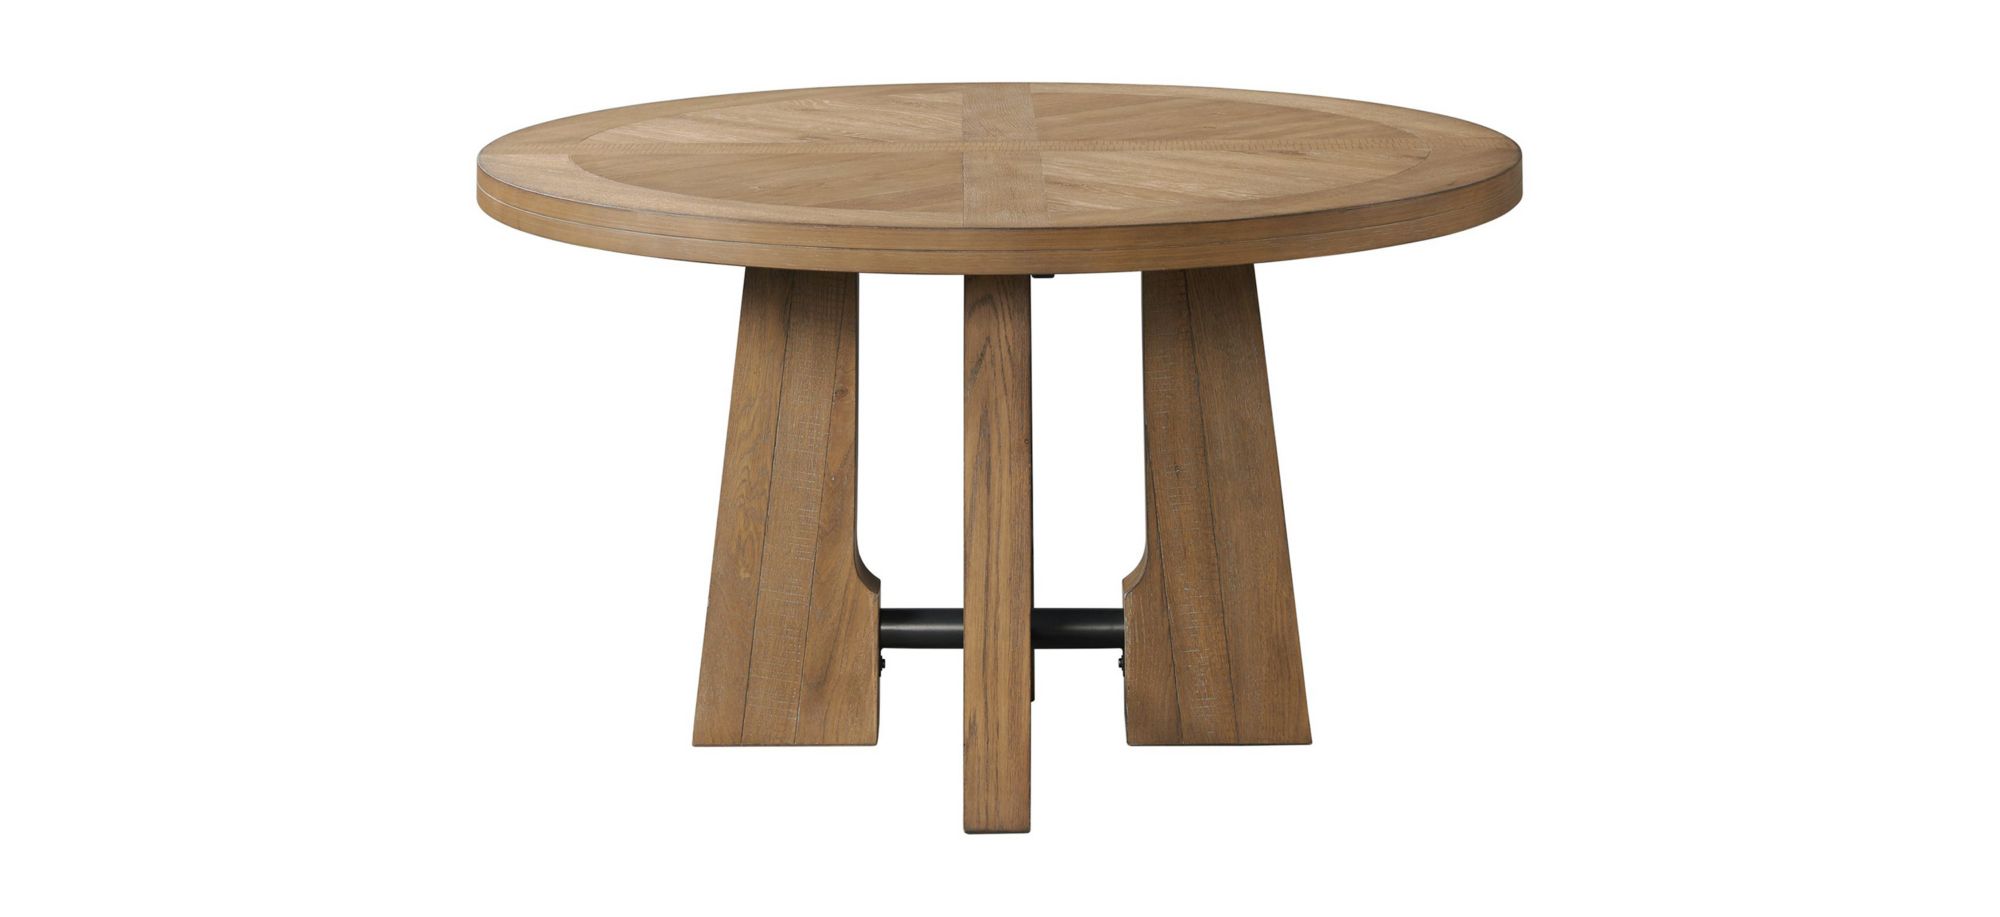 Landmark Round Table in Weathered Oak by Intercon